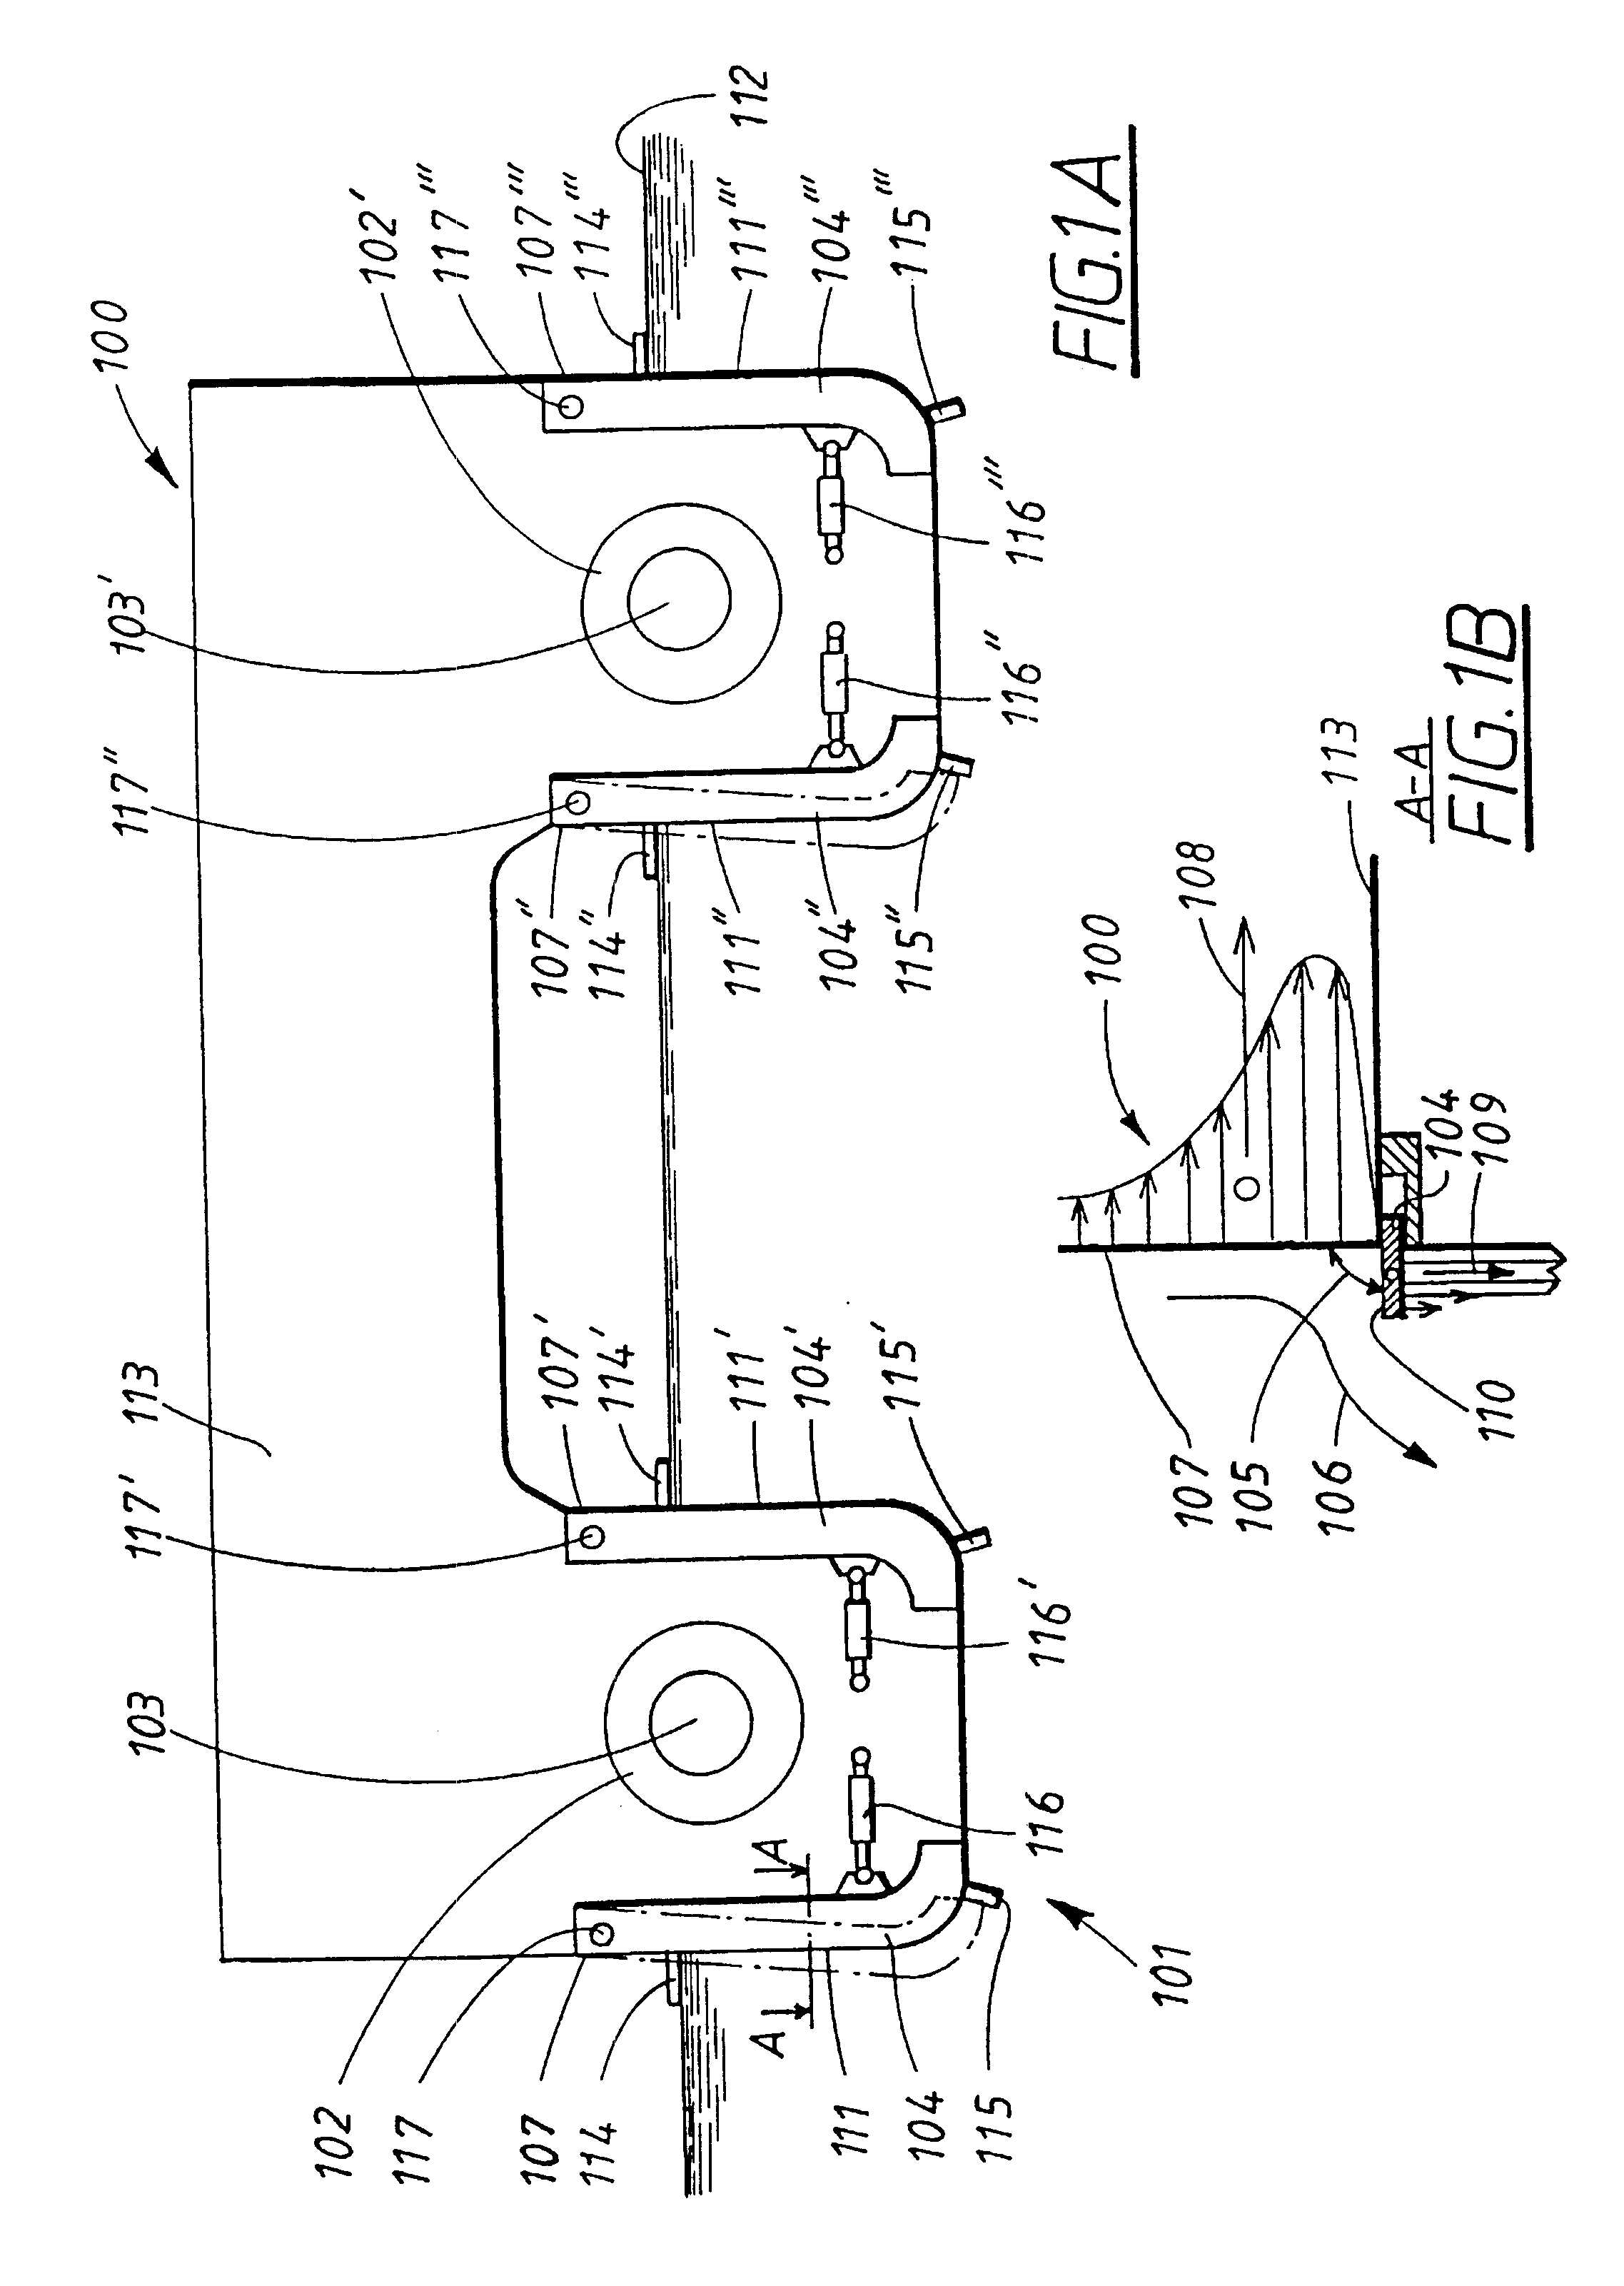 Arrangement and method for dynamic control of the movements and course of a high-speed ship hull